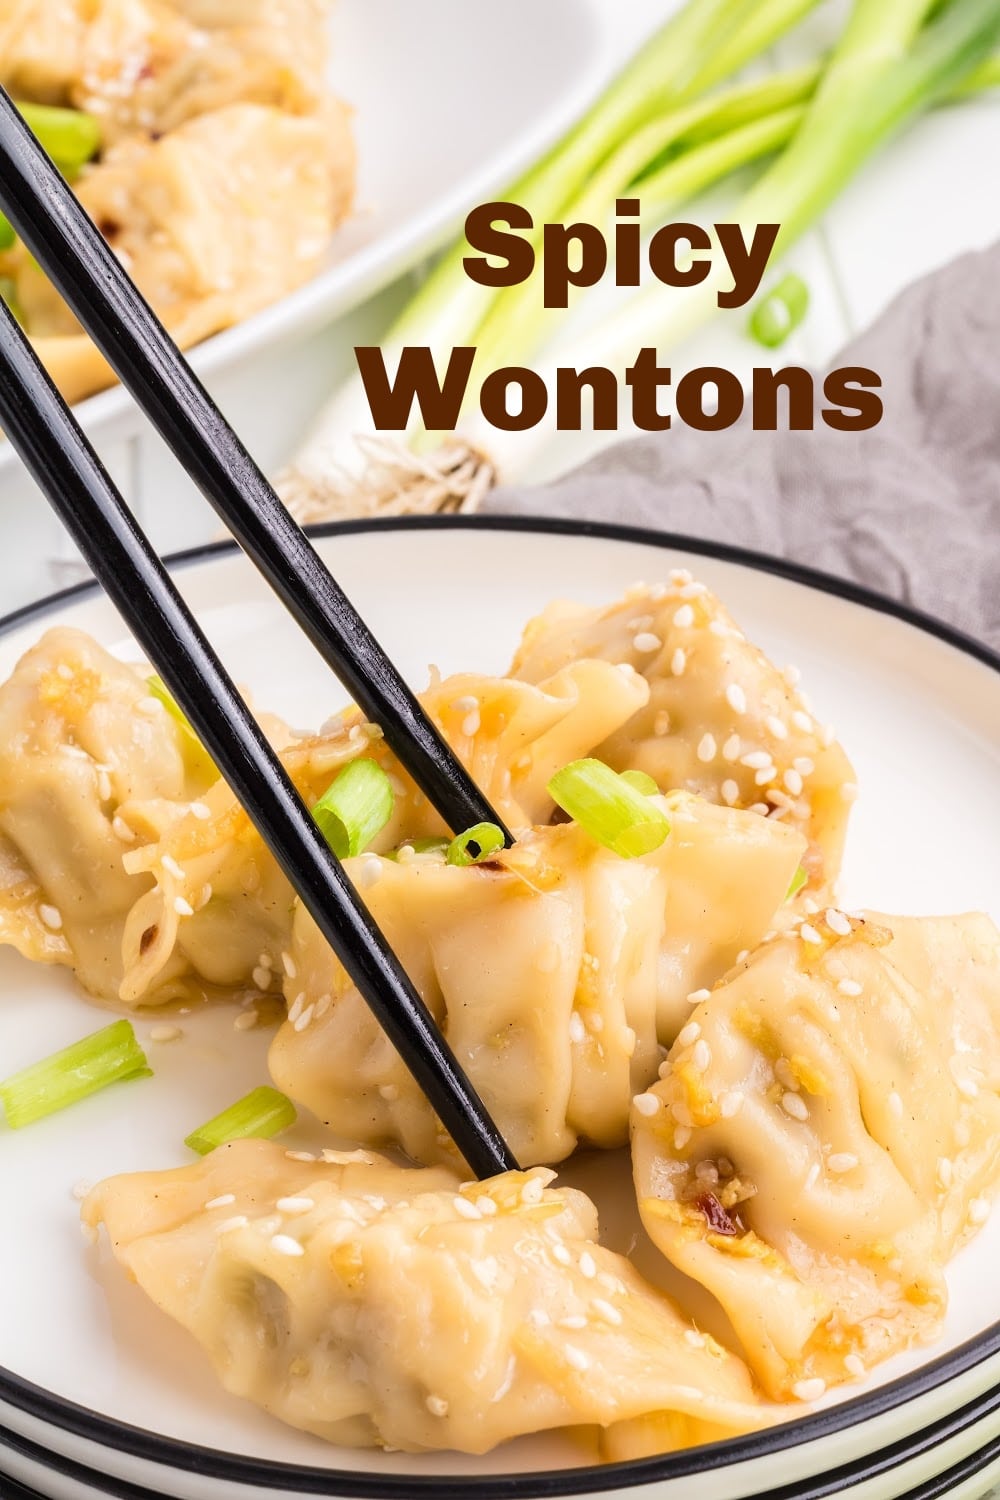 Spice up your meal with these mouthwatering spicy wontons! Made with fresh garlic, ginger, and a blend of seasonings, they're a crowd-pleaser. via @cmpollak1